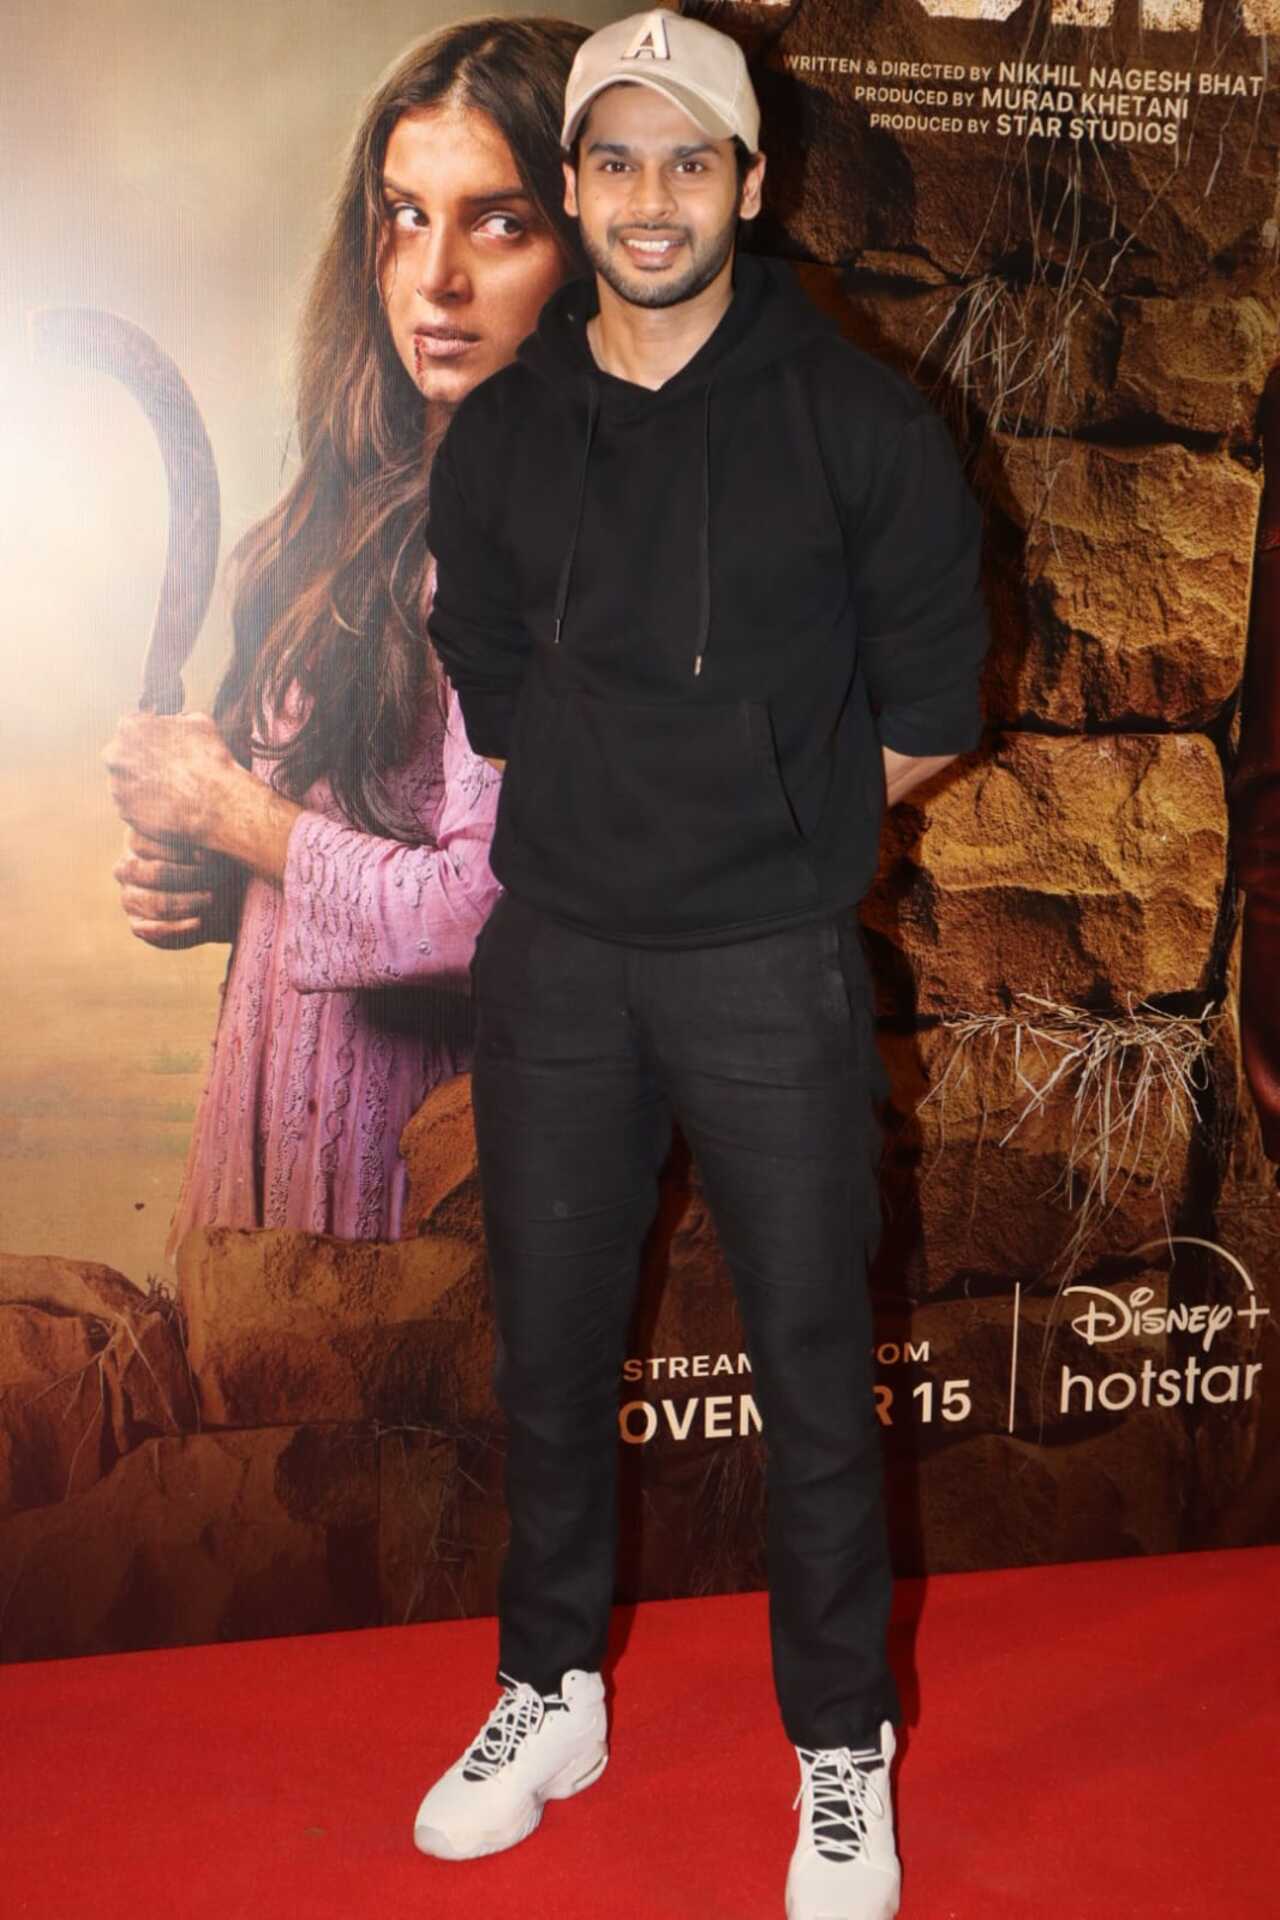 Abhimanyu Dassani flashed a smile for the paparazzi as he arrived in casual wear for the screening